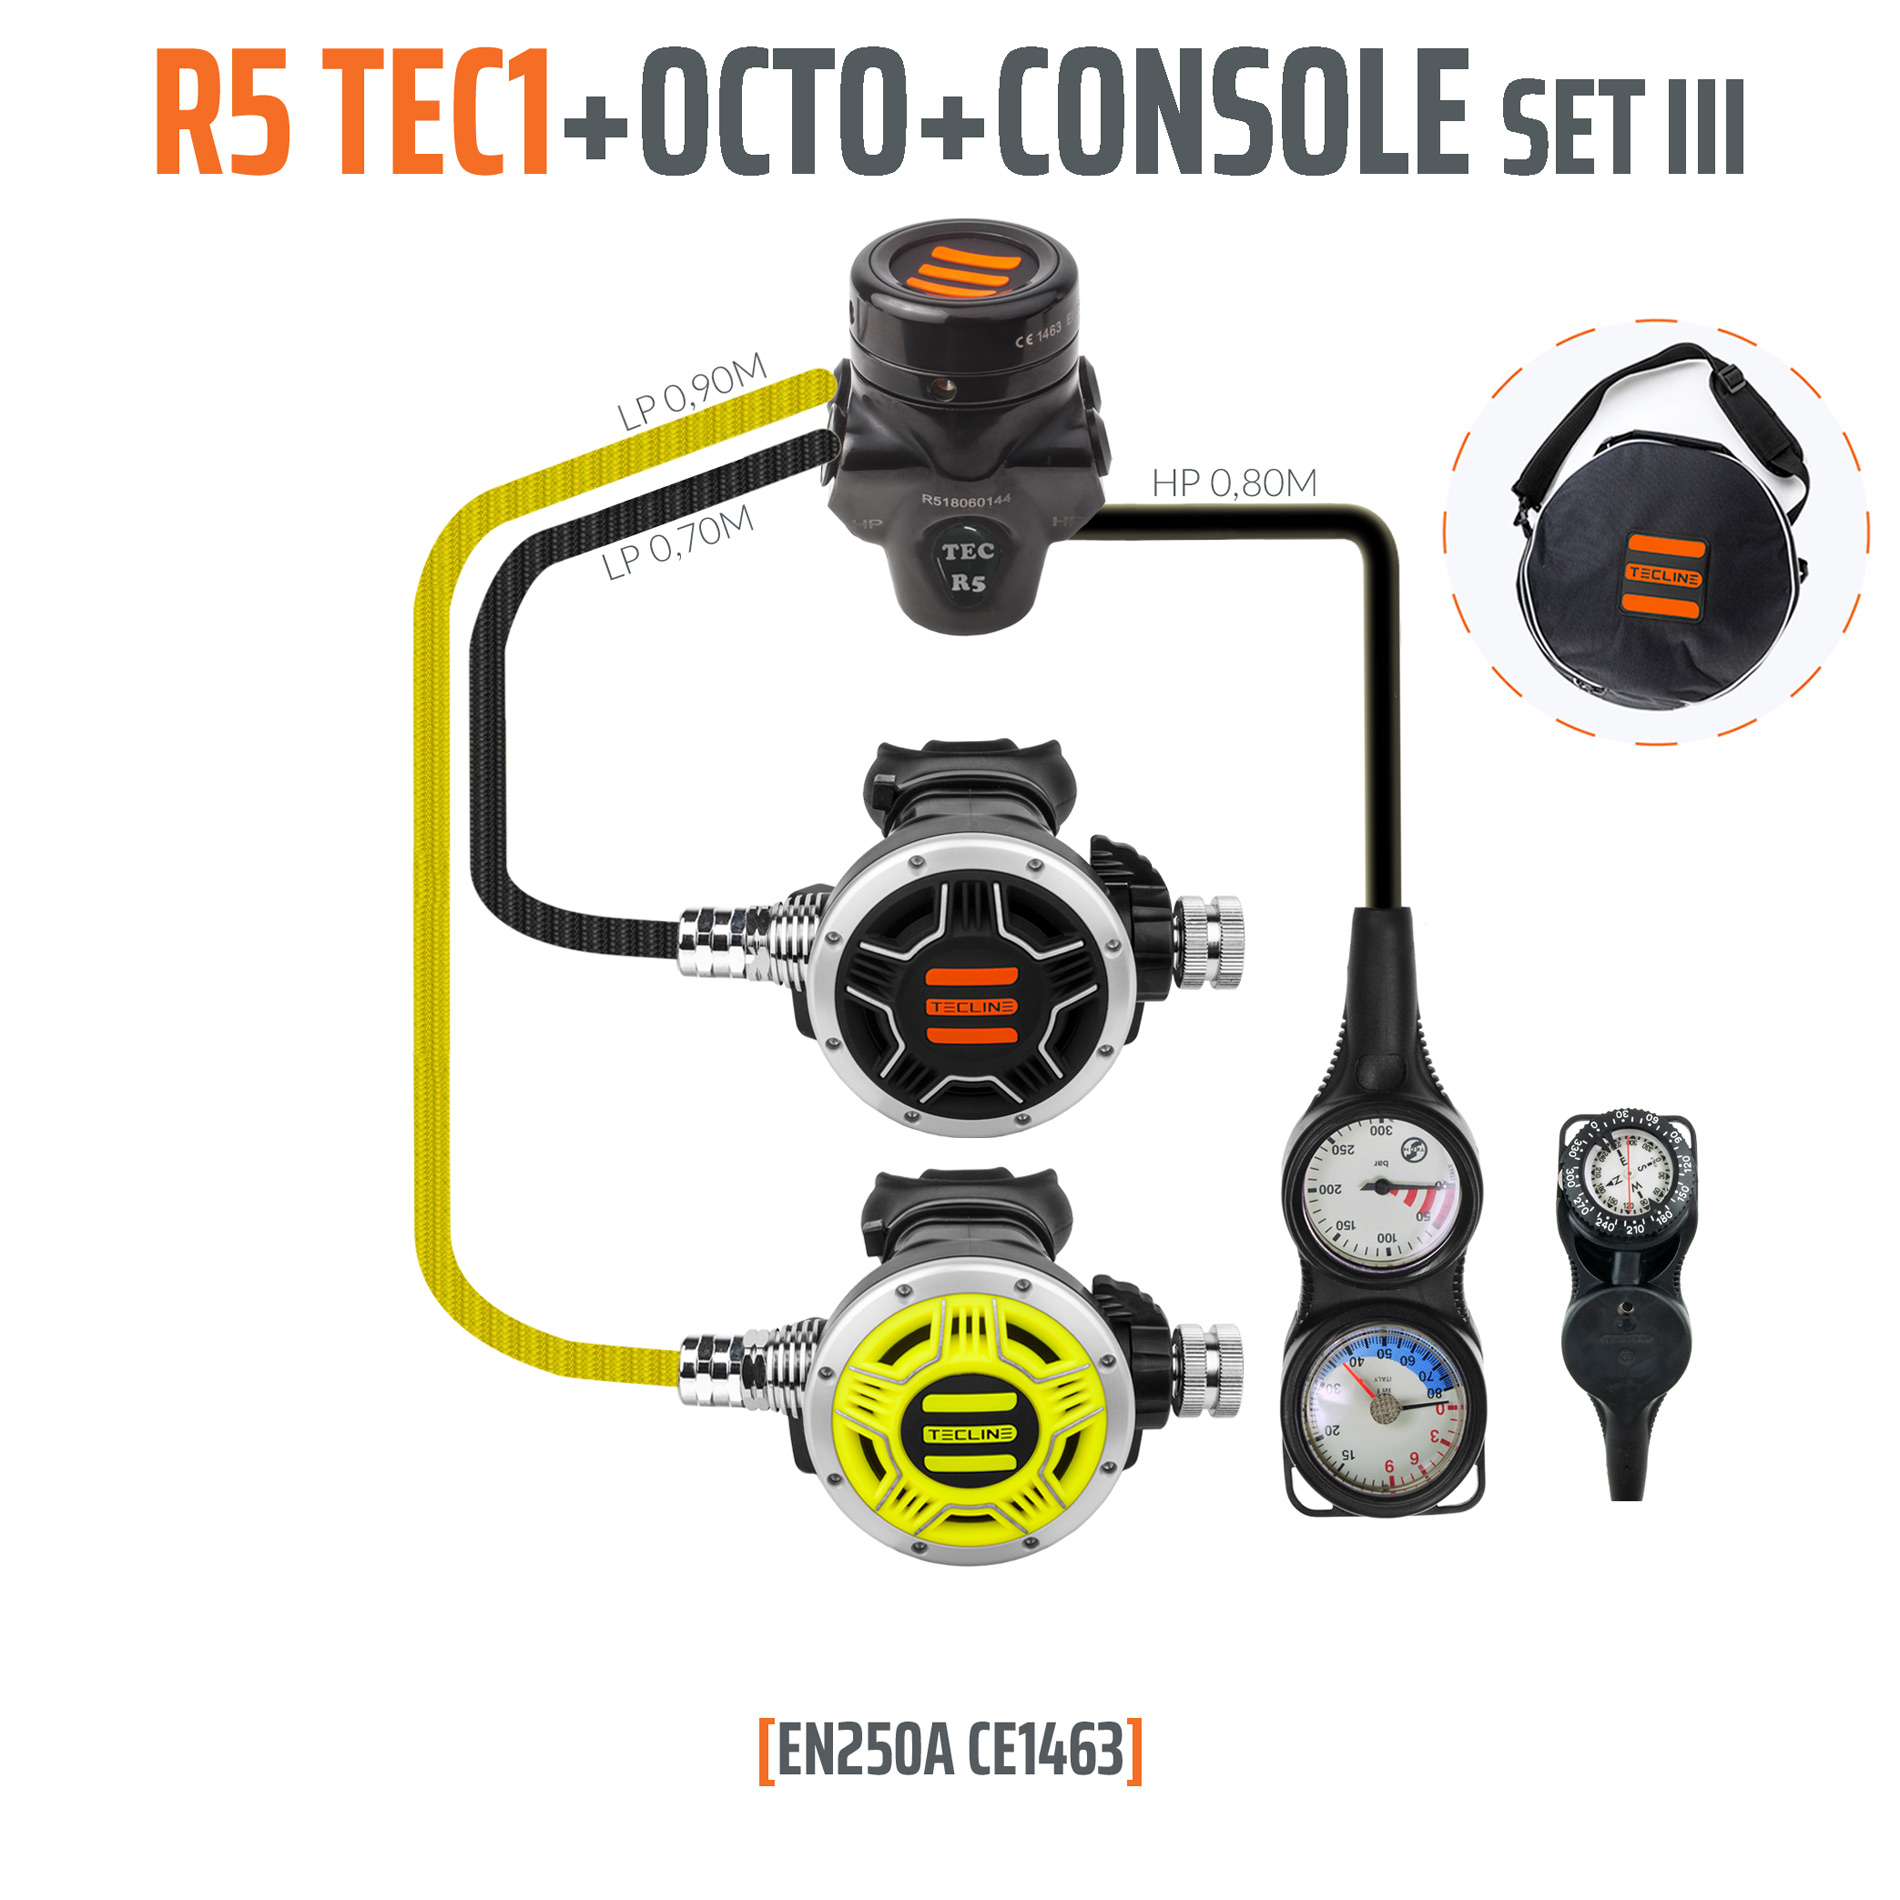 Tecline Regulator R5 TEC1 set III with octo and 3 elements console – EN250A